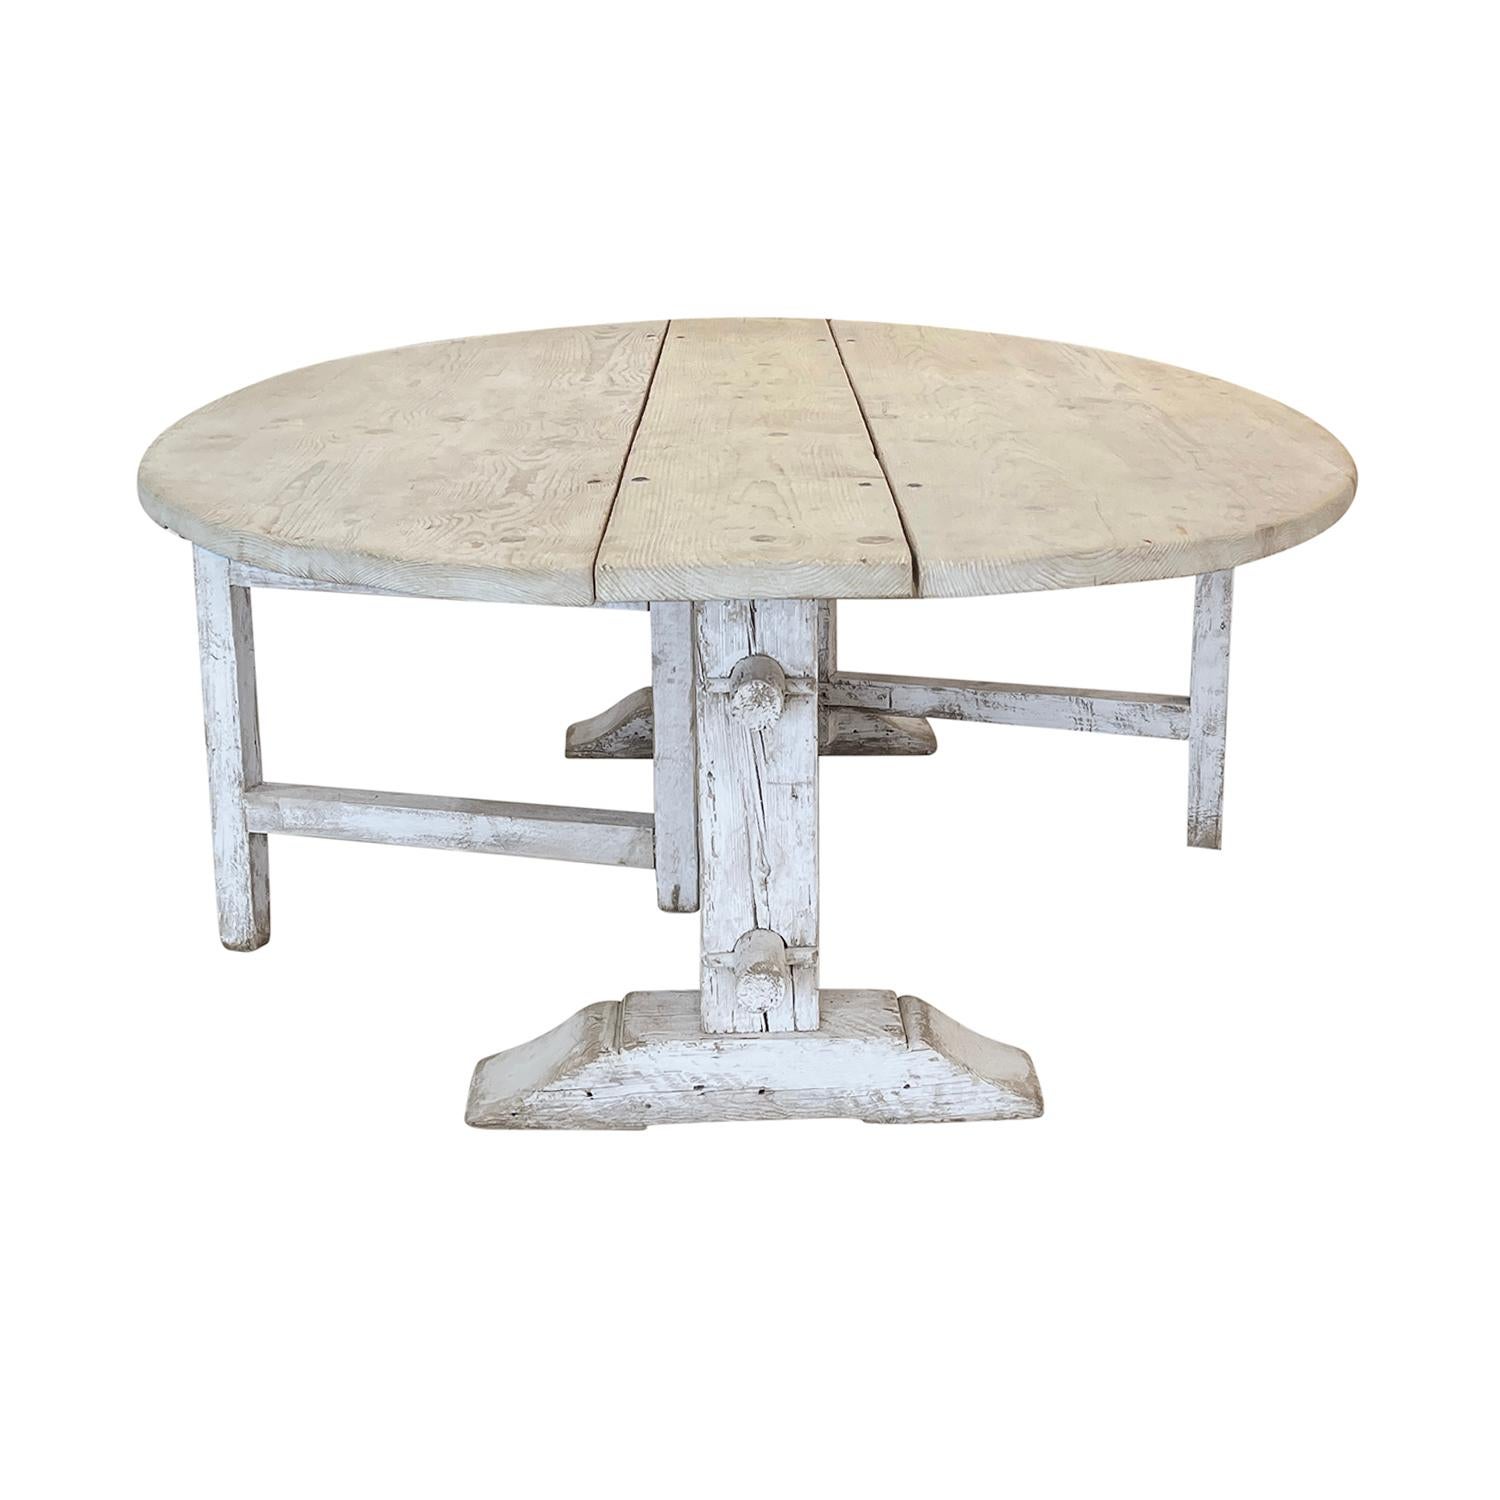 Hand-Carved 19th Century Grey-White Italian Folding Table, Round Pinewood Farm Dining Table